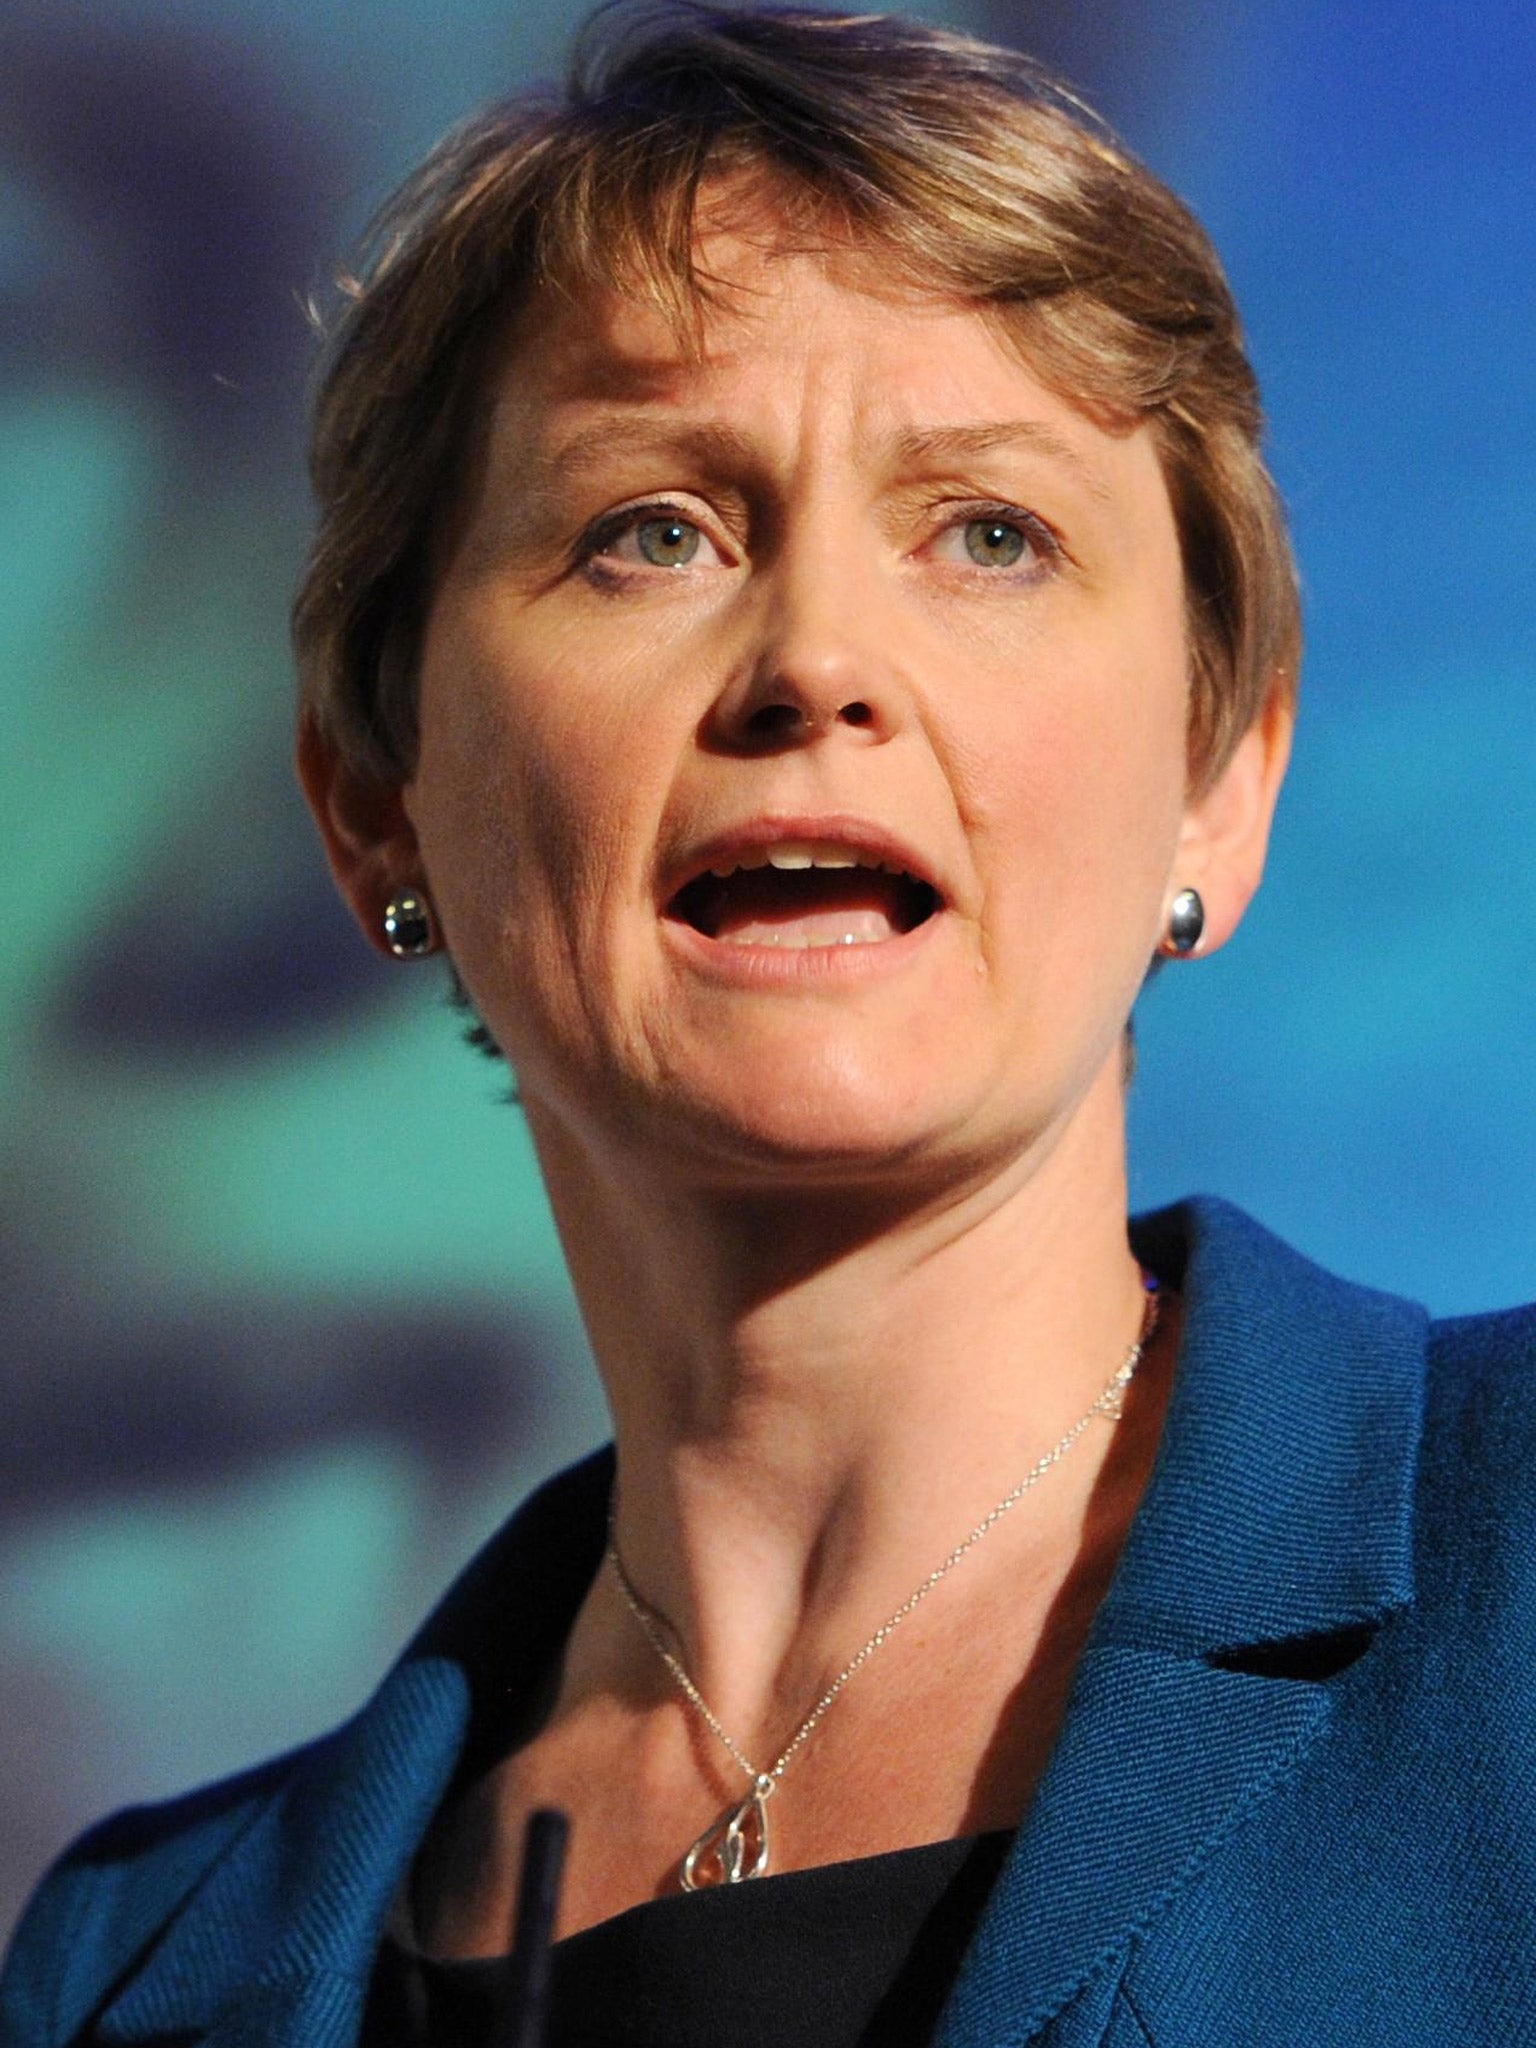 The Shadow Home Secretary is due to set out Labour’s stance on immigration